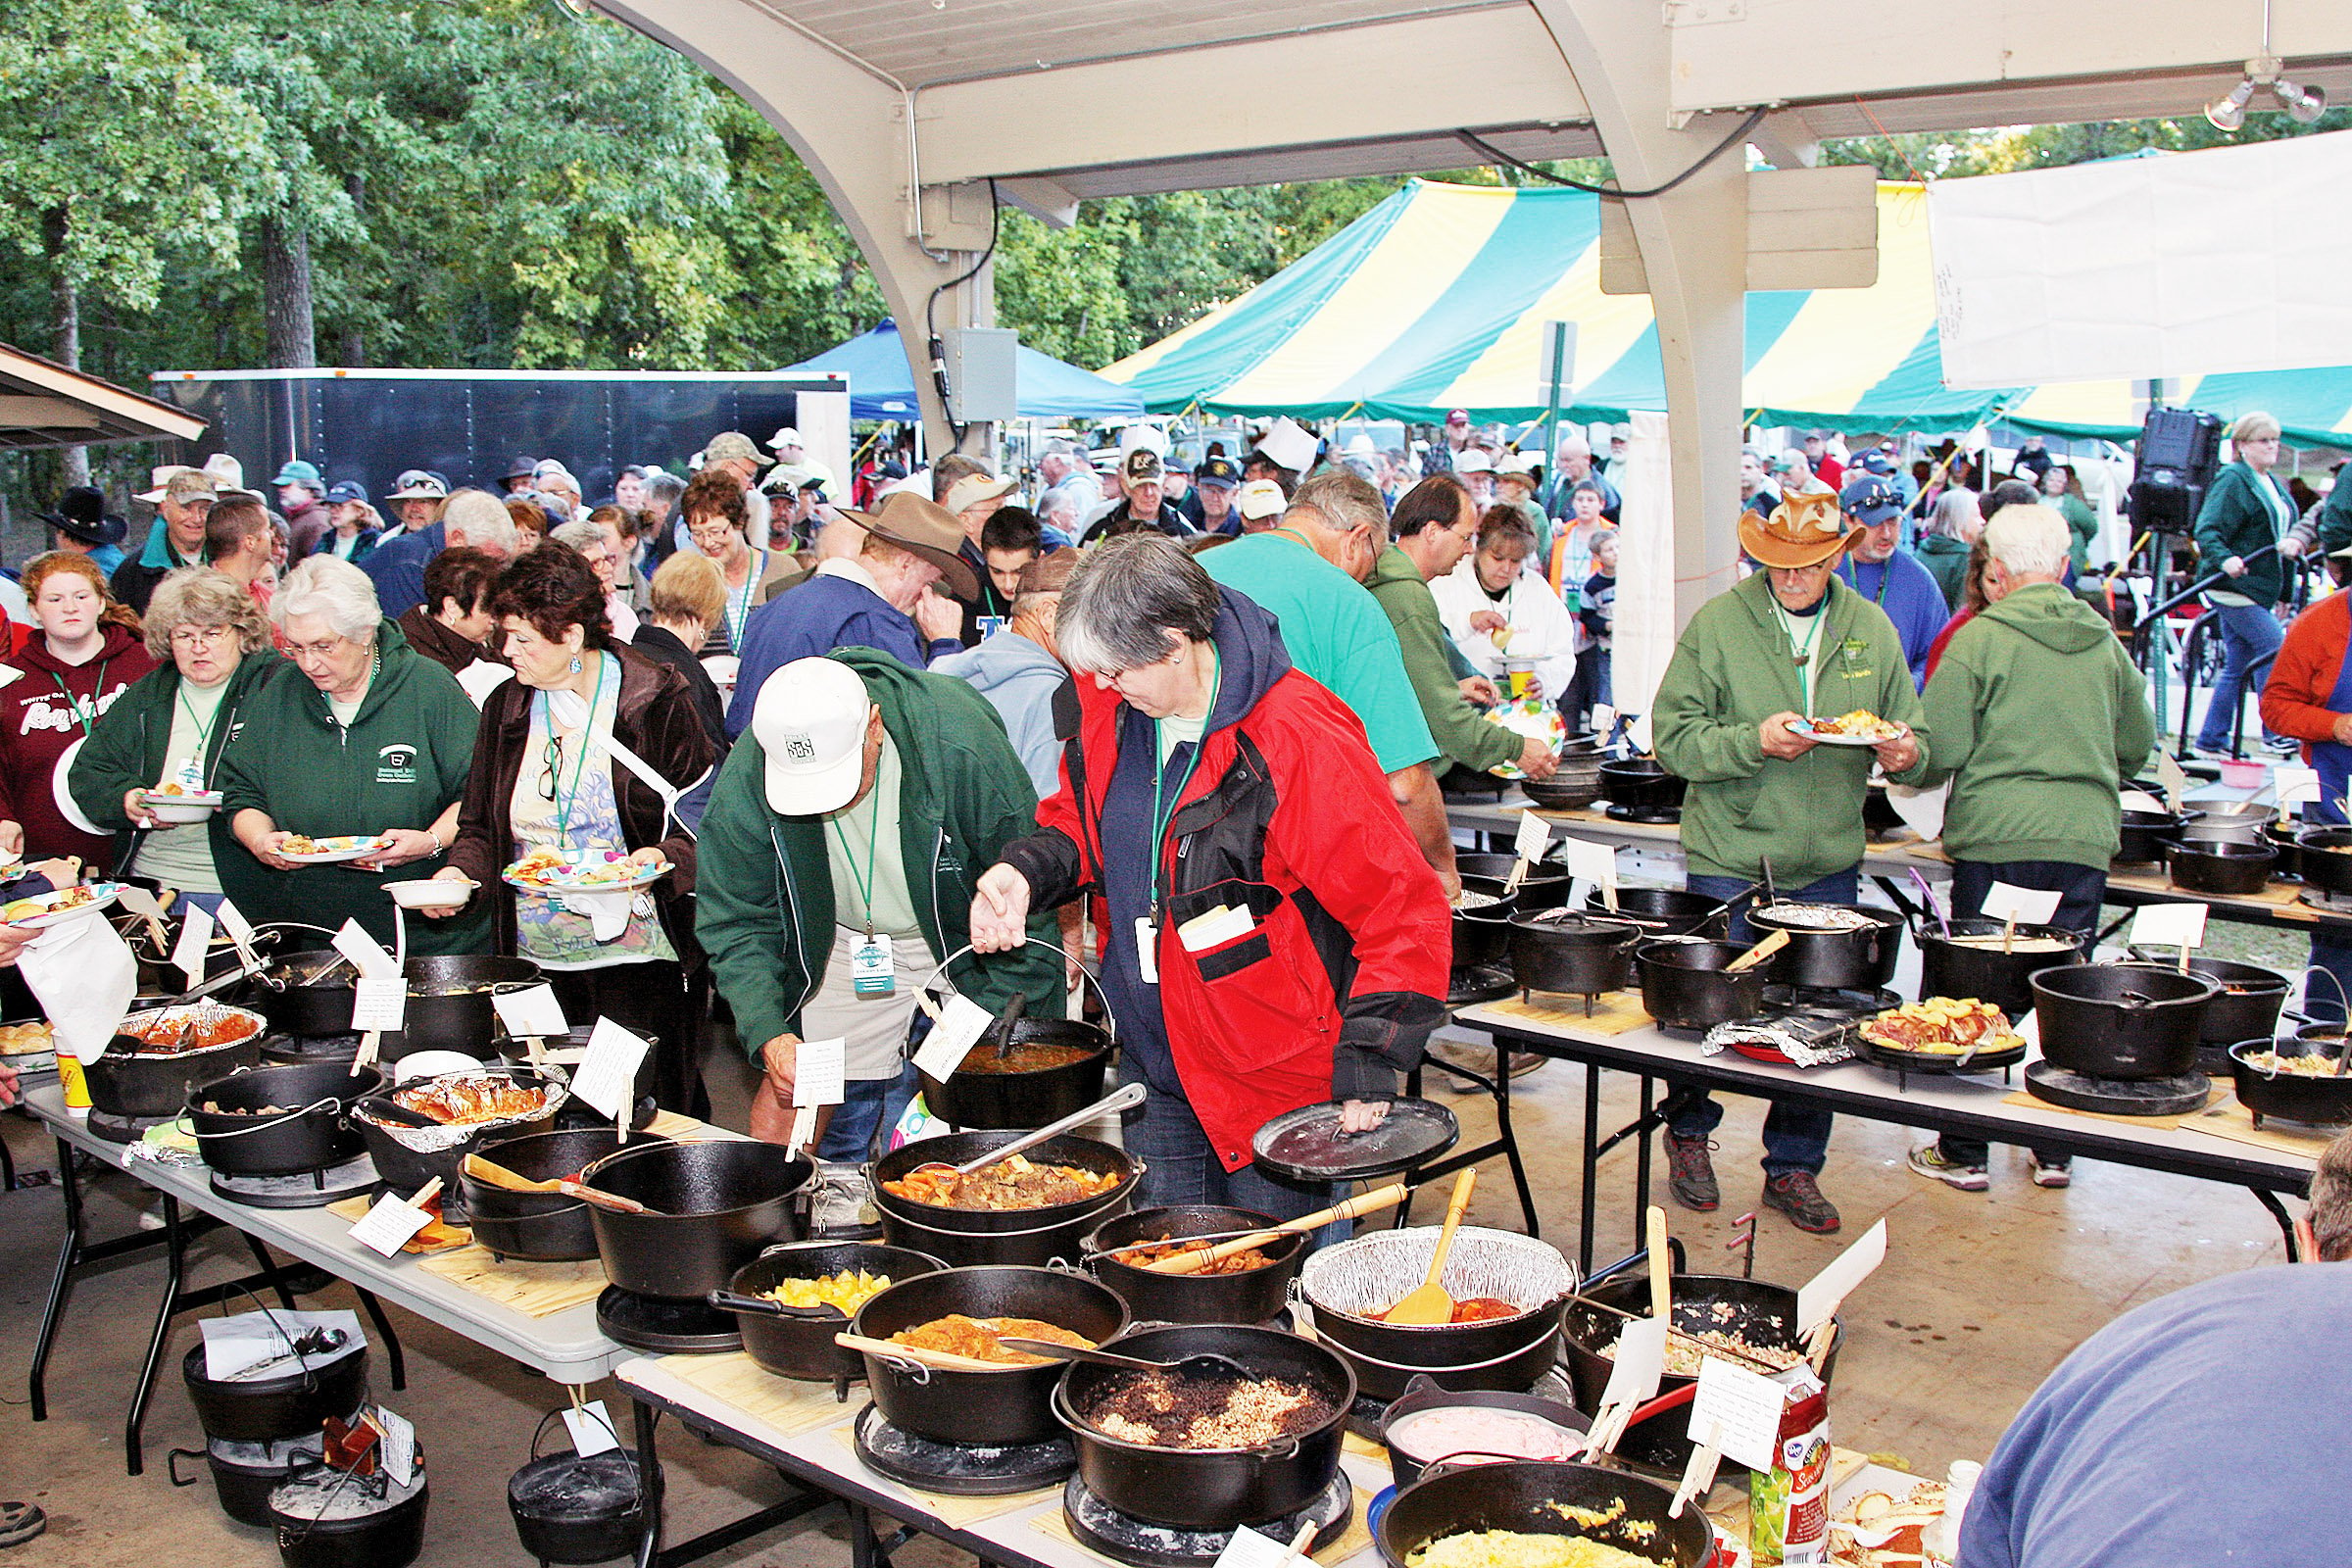 Crowd makes meals during National Dutch Oven Gathering